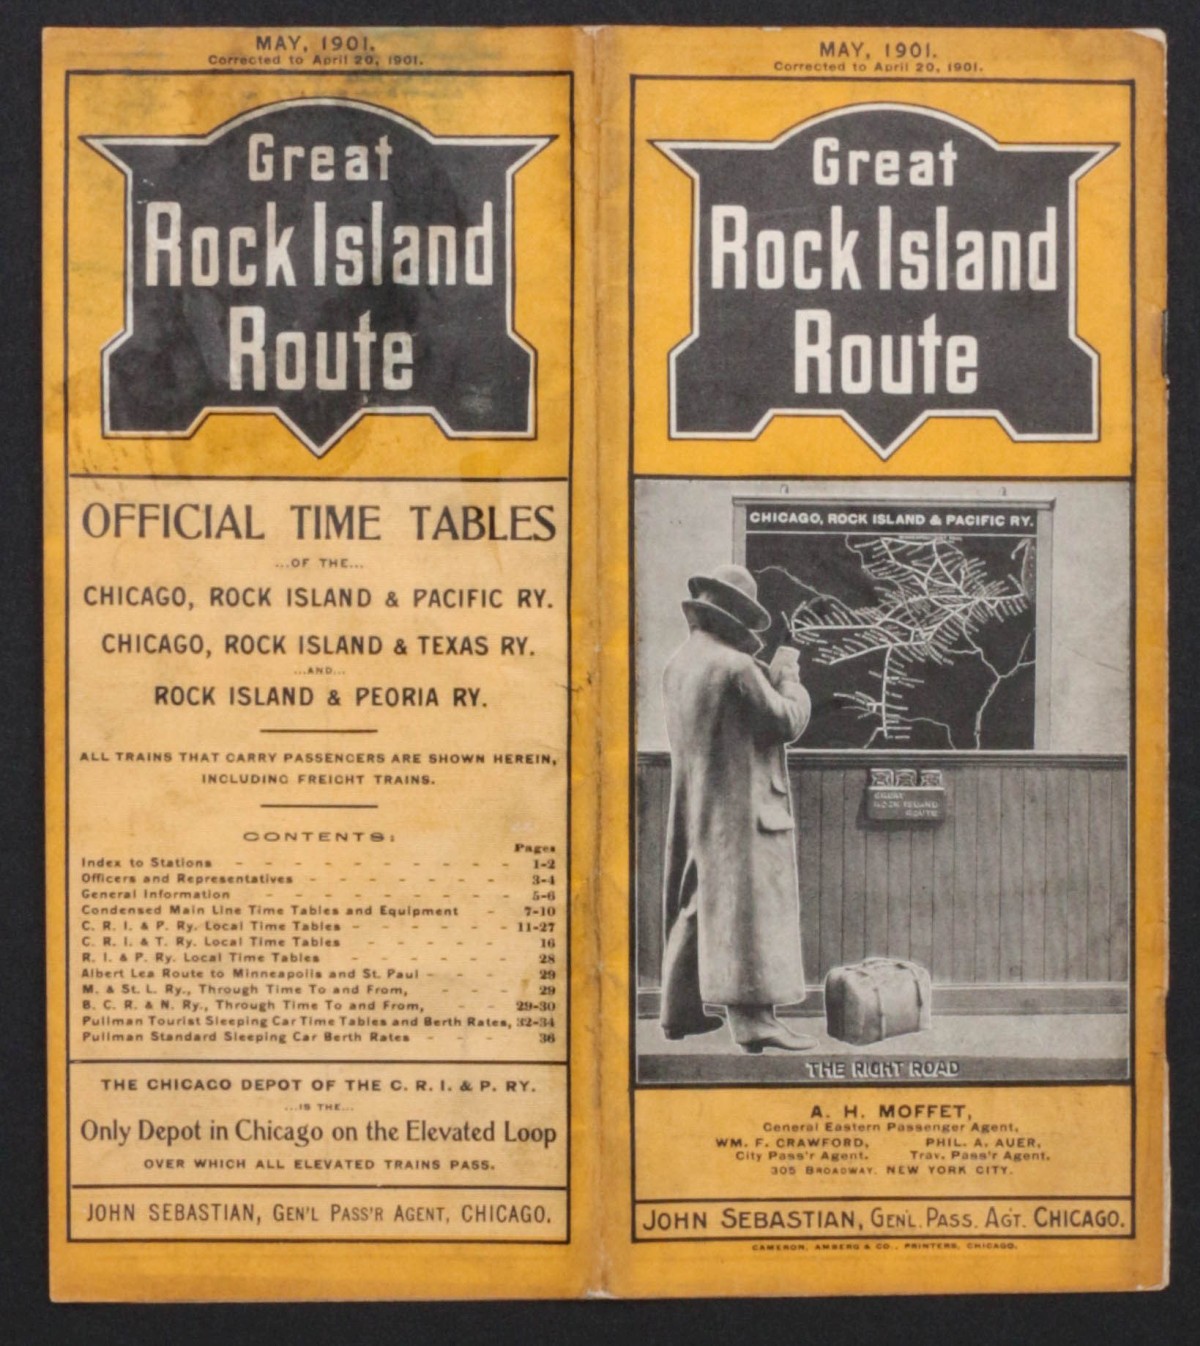 GREAT ROCK ISLAND ROUTE TIMETABLE FOR MAY 1901